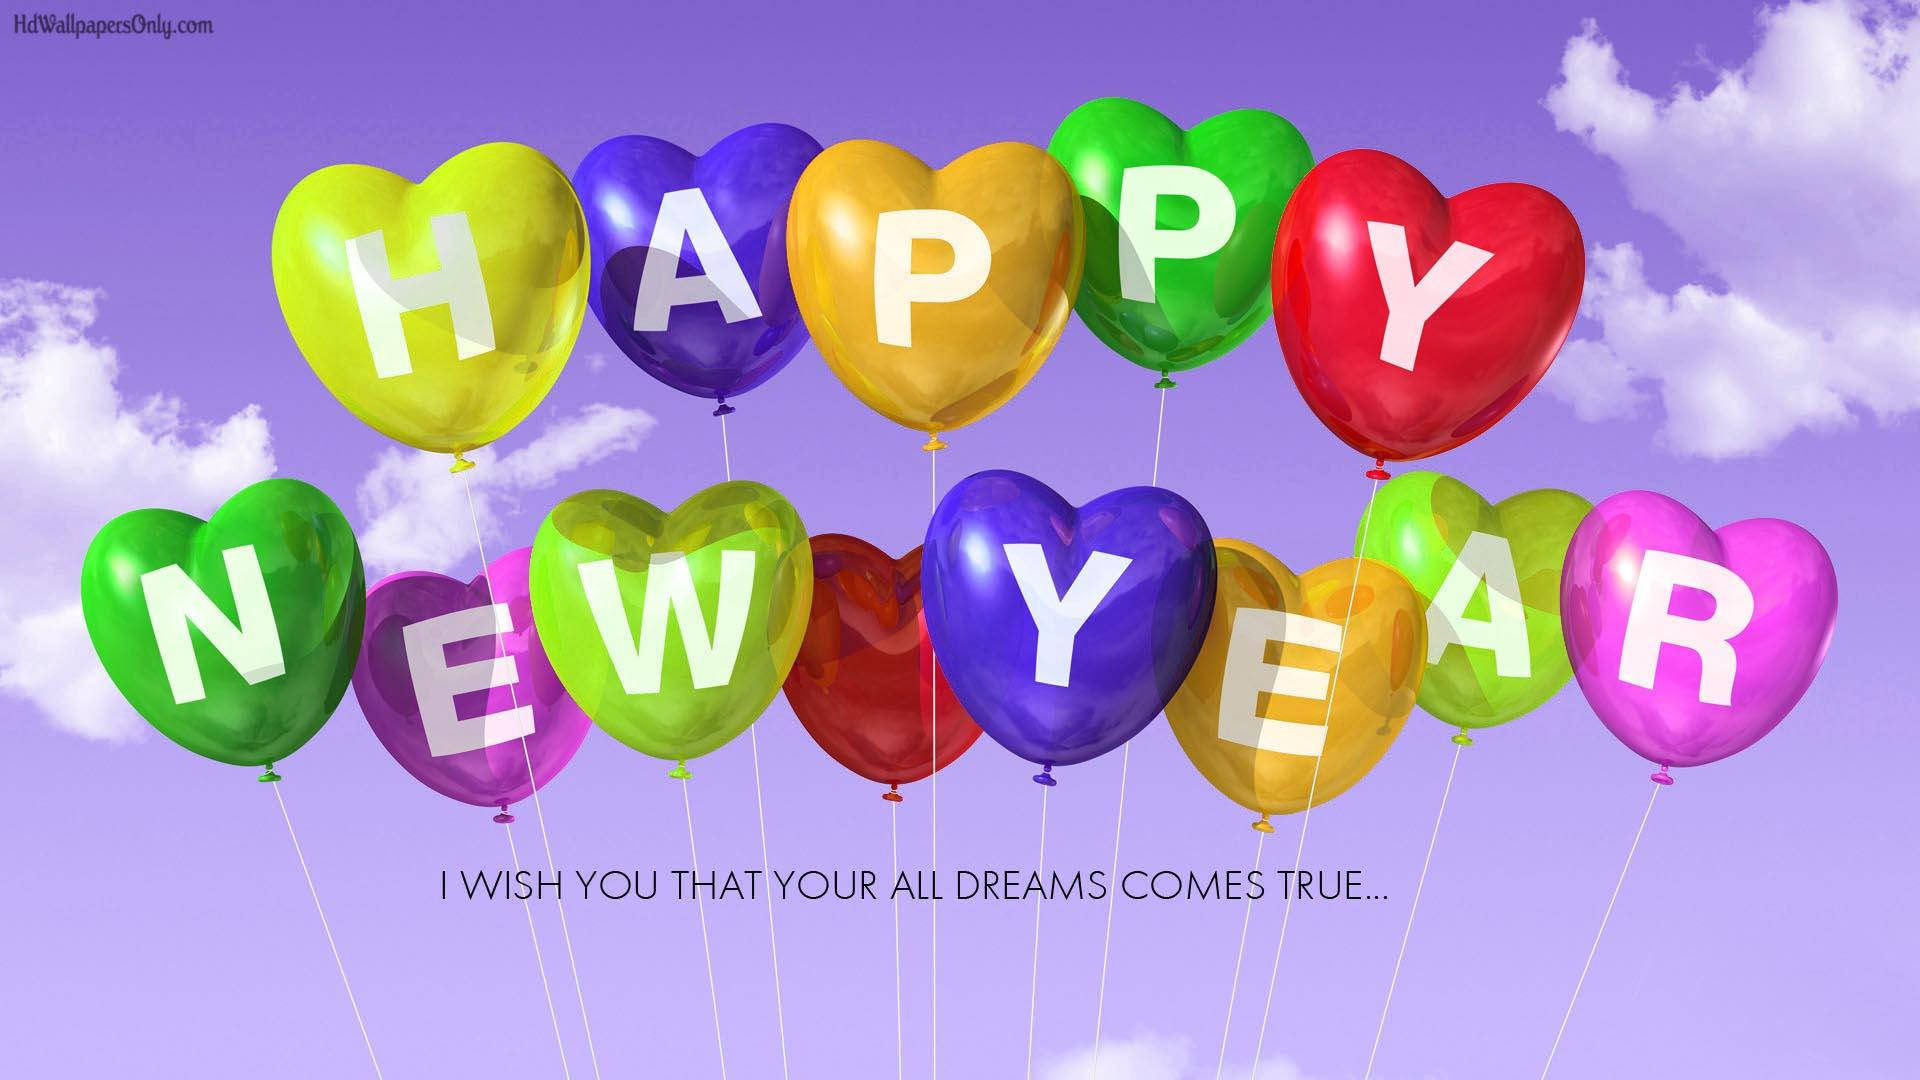 Caption: Celebrate Love And Fresh Beginnings With Cute Happy New Year 2021 Heart Balloons